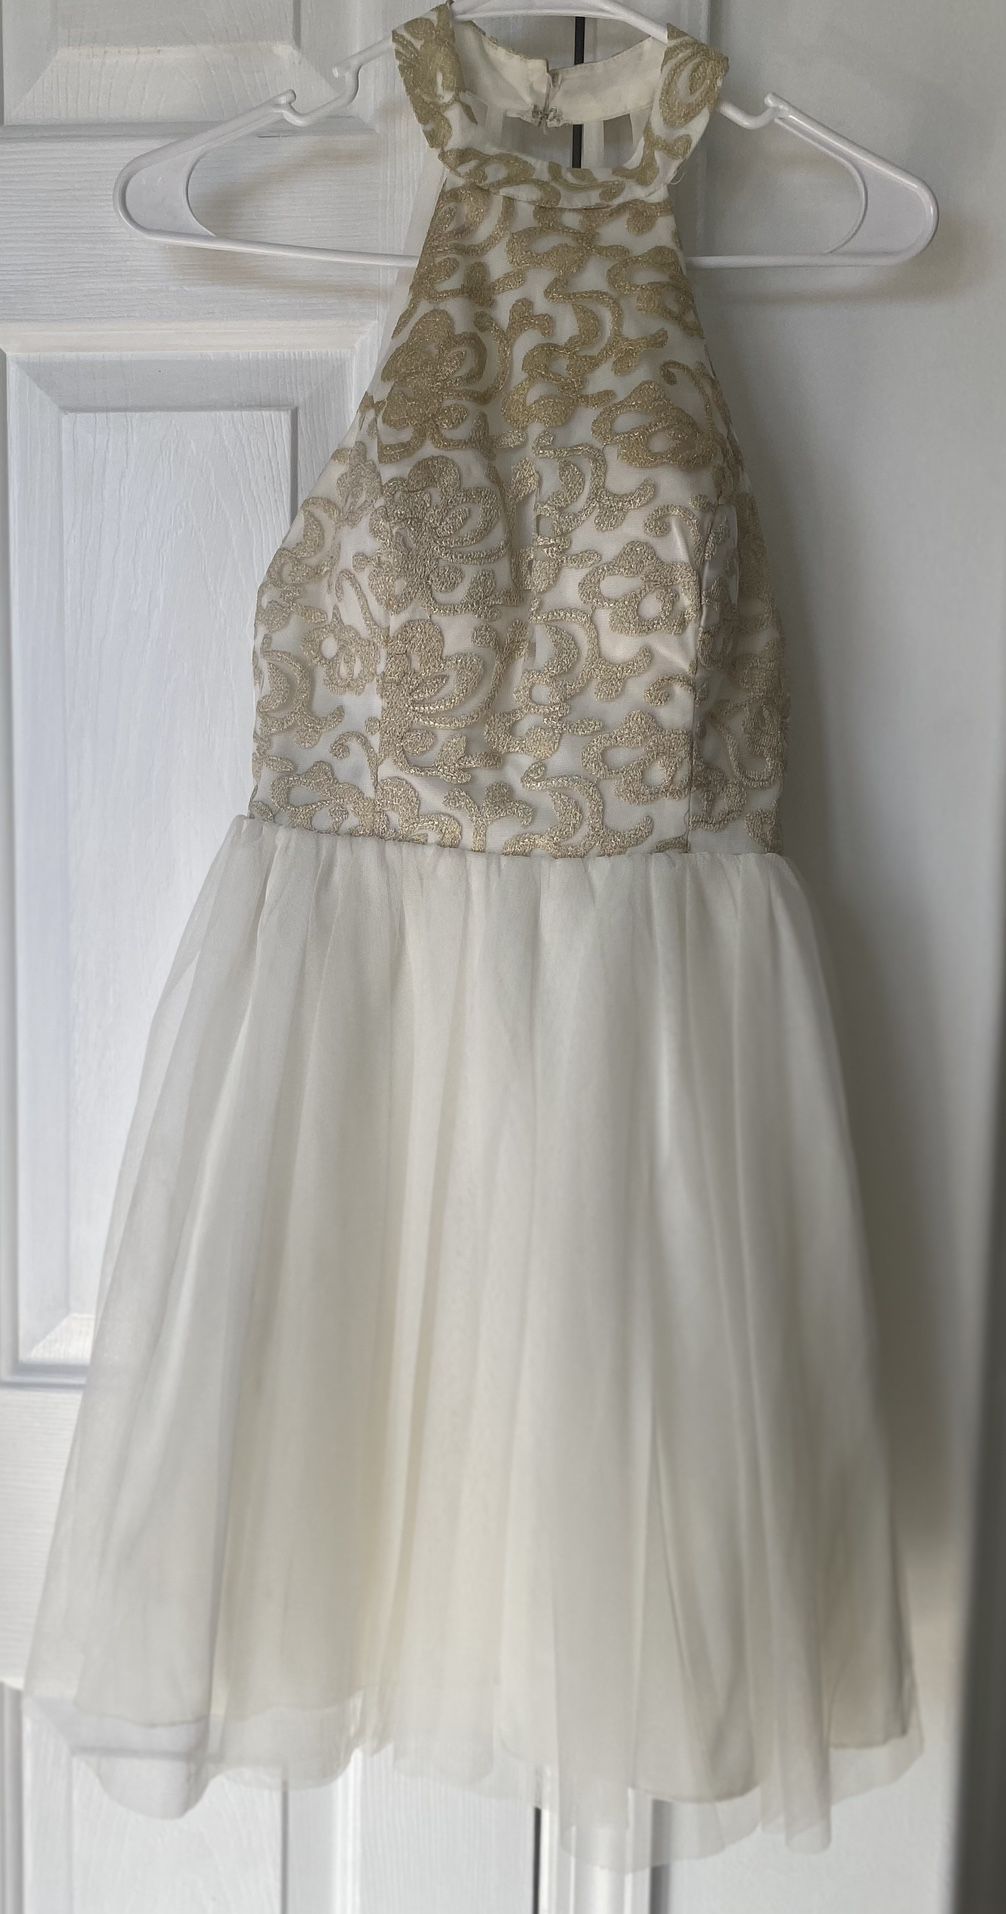 Sequin hearts gold and white dress